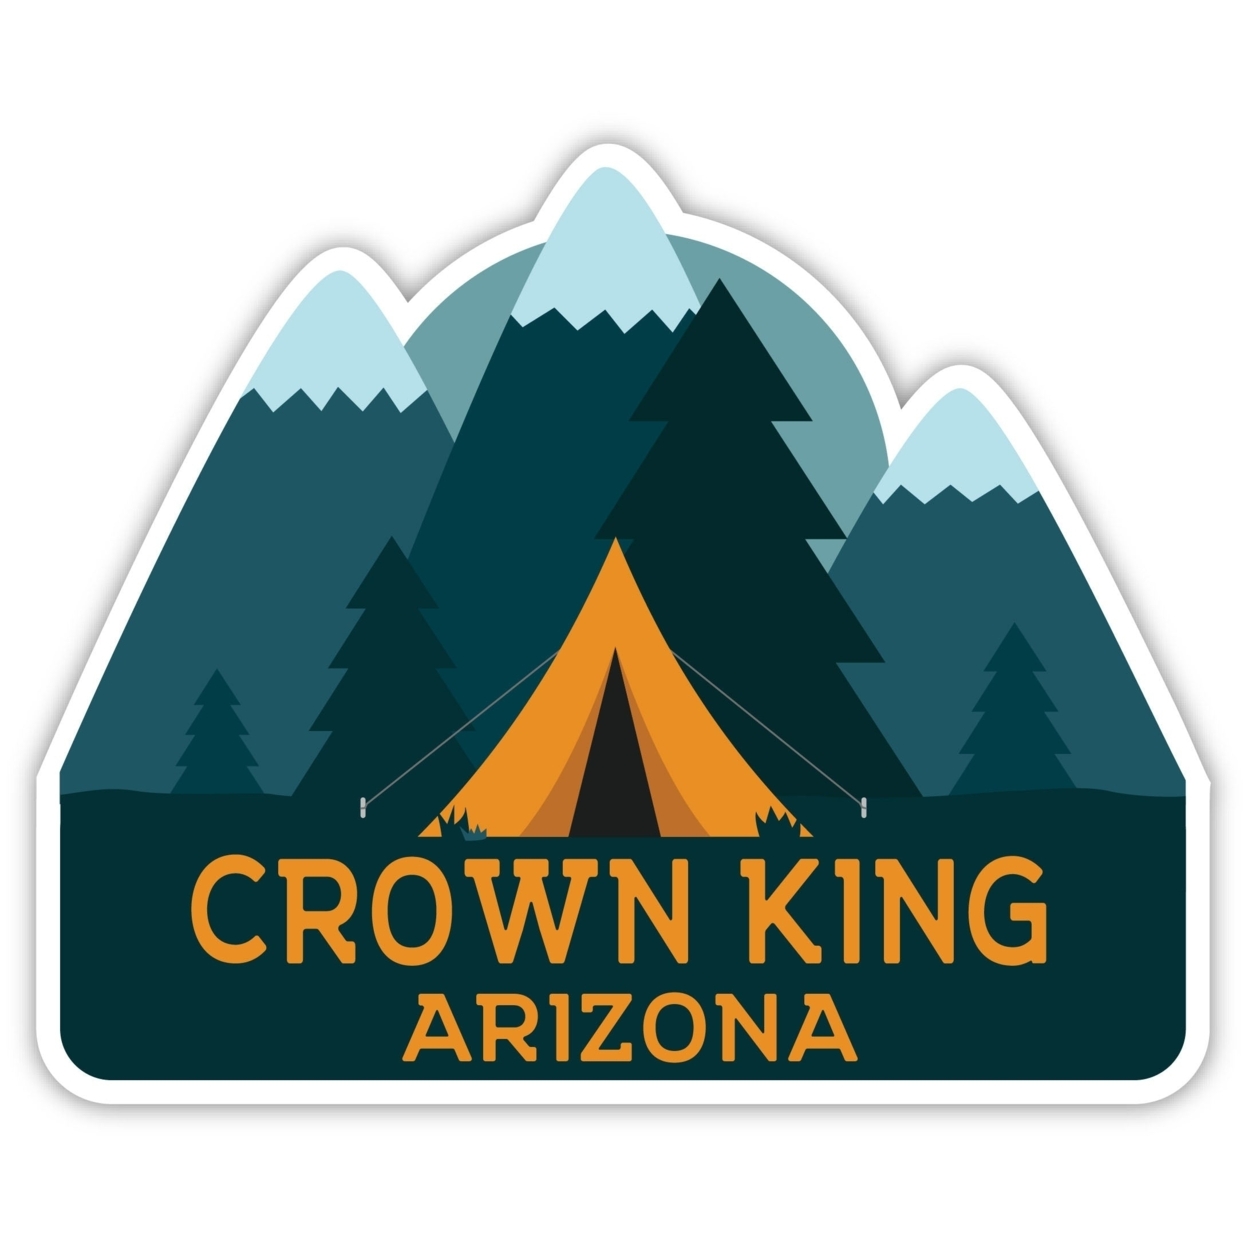 Crown King Arizona Souvenir Decorative Stickers (Choose Theme And Size) - 4-Pack, 2-Inch, Tent